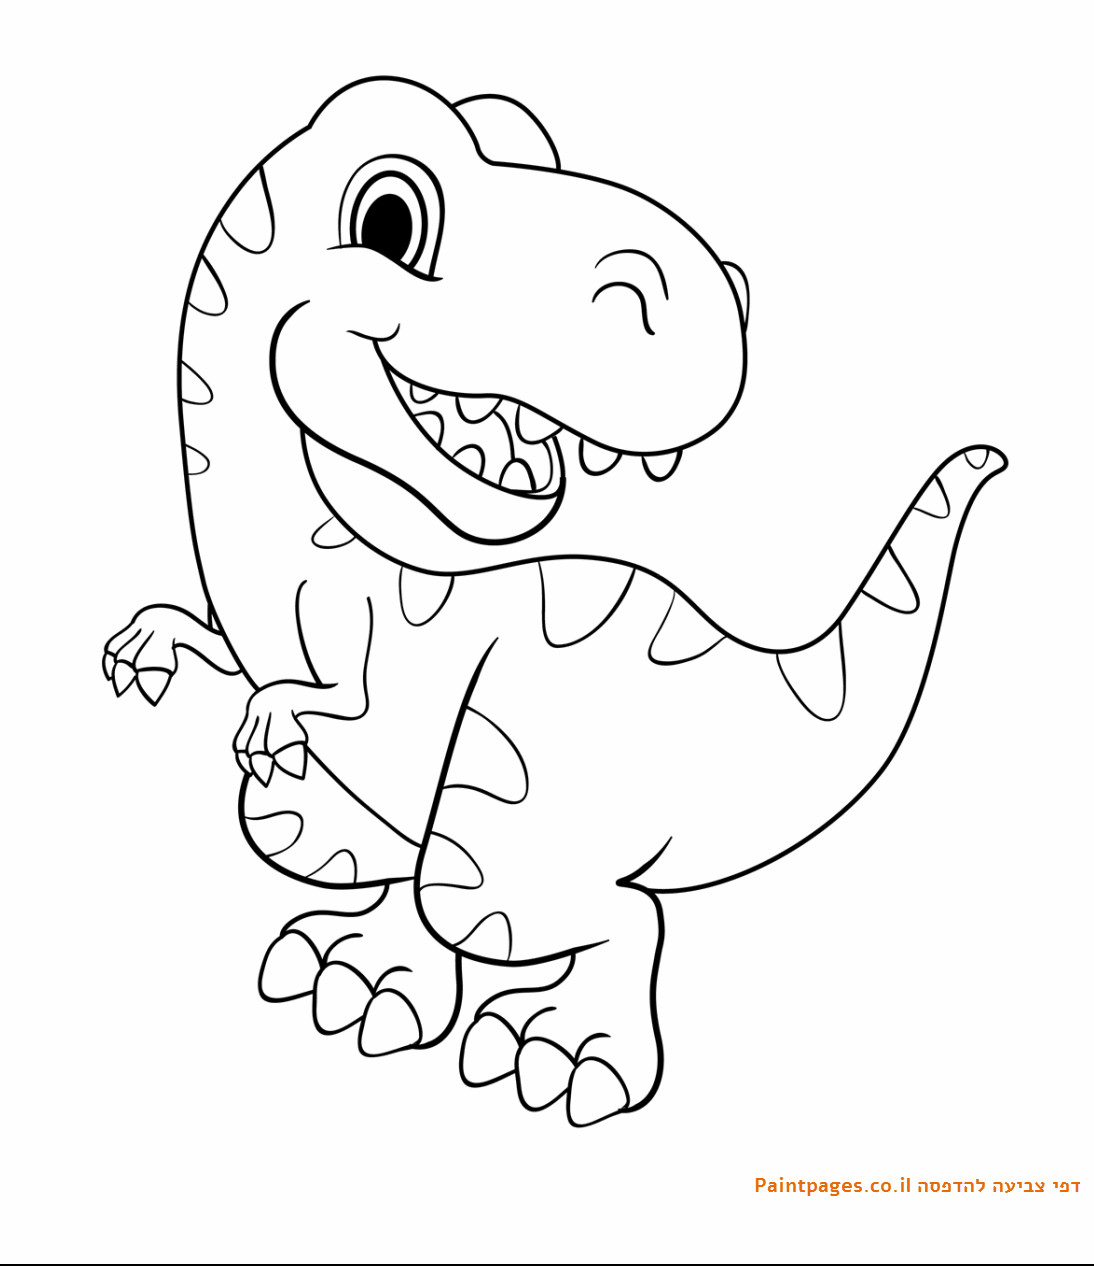 Coloring Pages For Kids Dinosaurs
 דף צביעה דינוזאור רקס